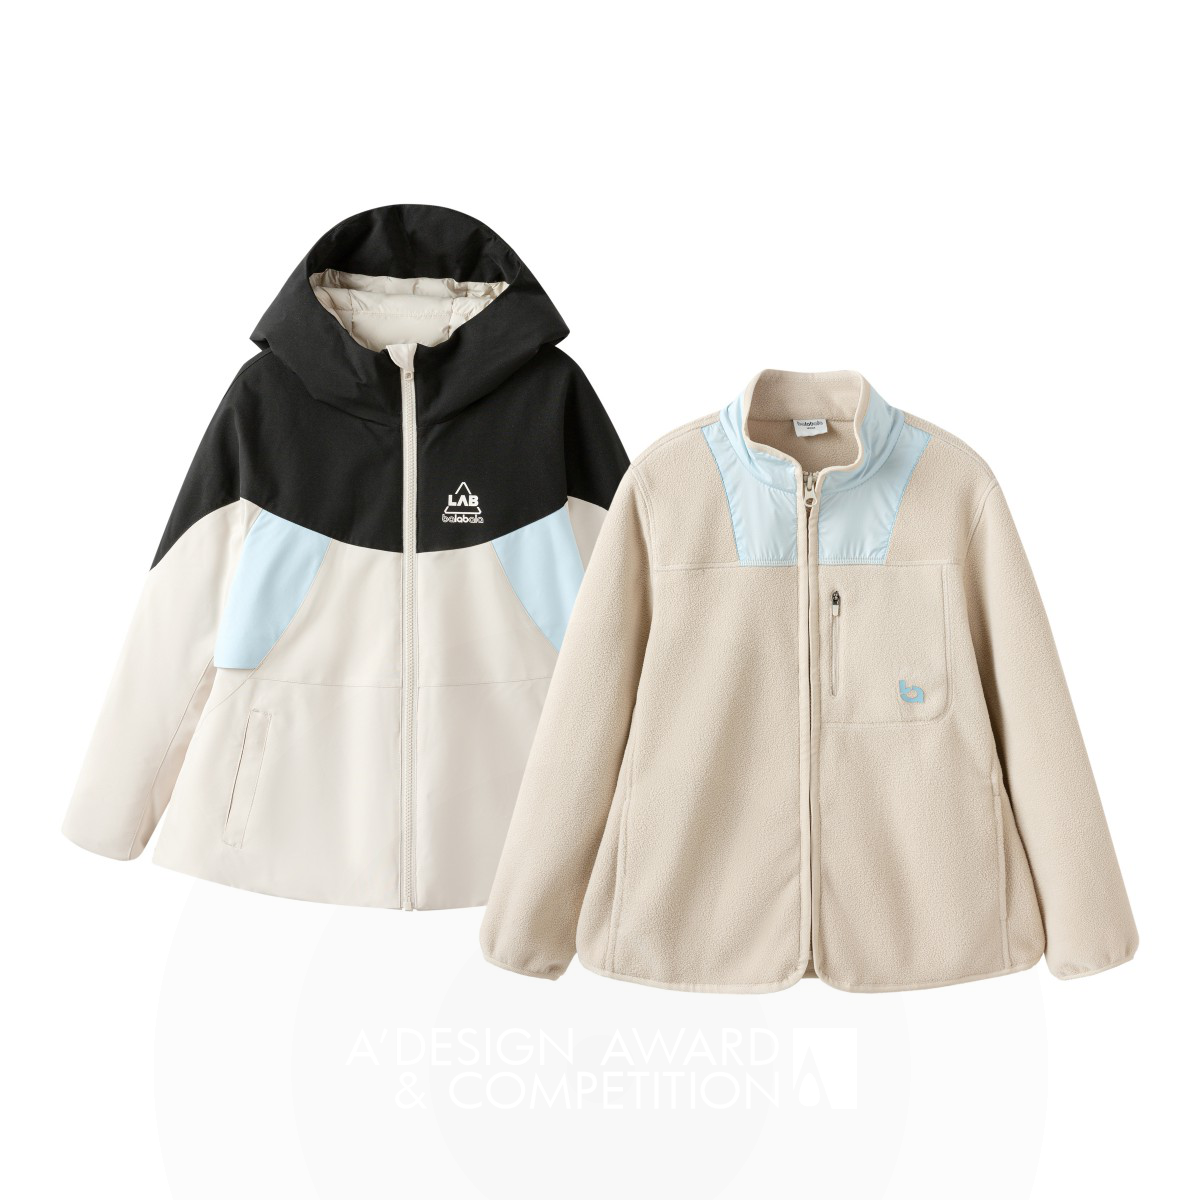 ZHE JIANG SEMIR GARMENT CO.,LTD. wins Bronze at the prestigious A' Baby, Kids and Children's Products Design Award with Flame-retardant Down Jacket Kids' Clothing.